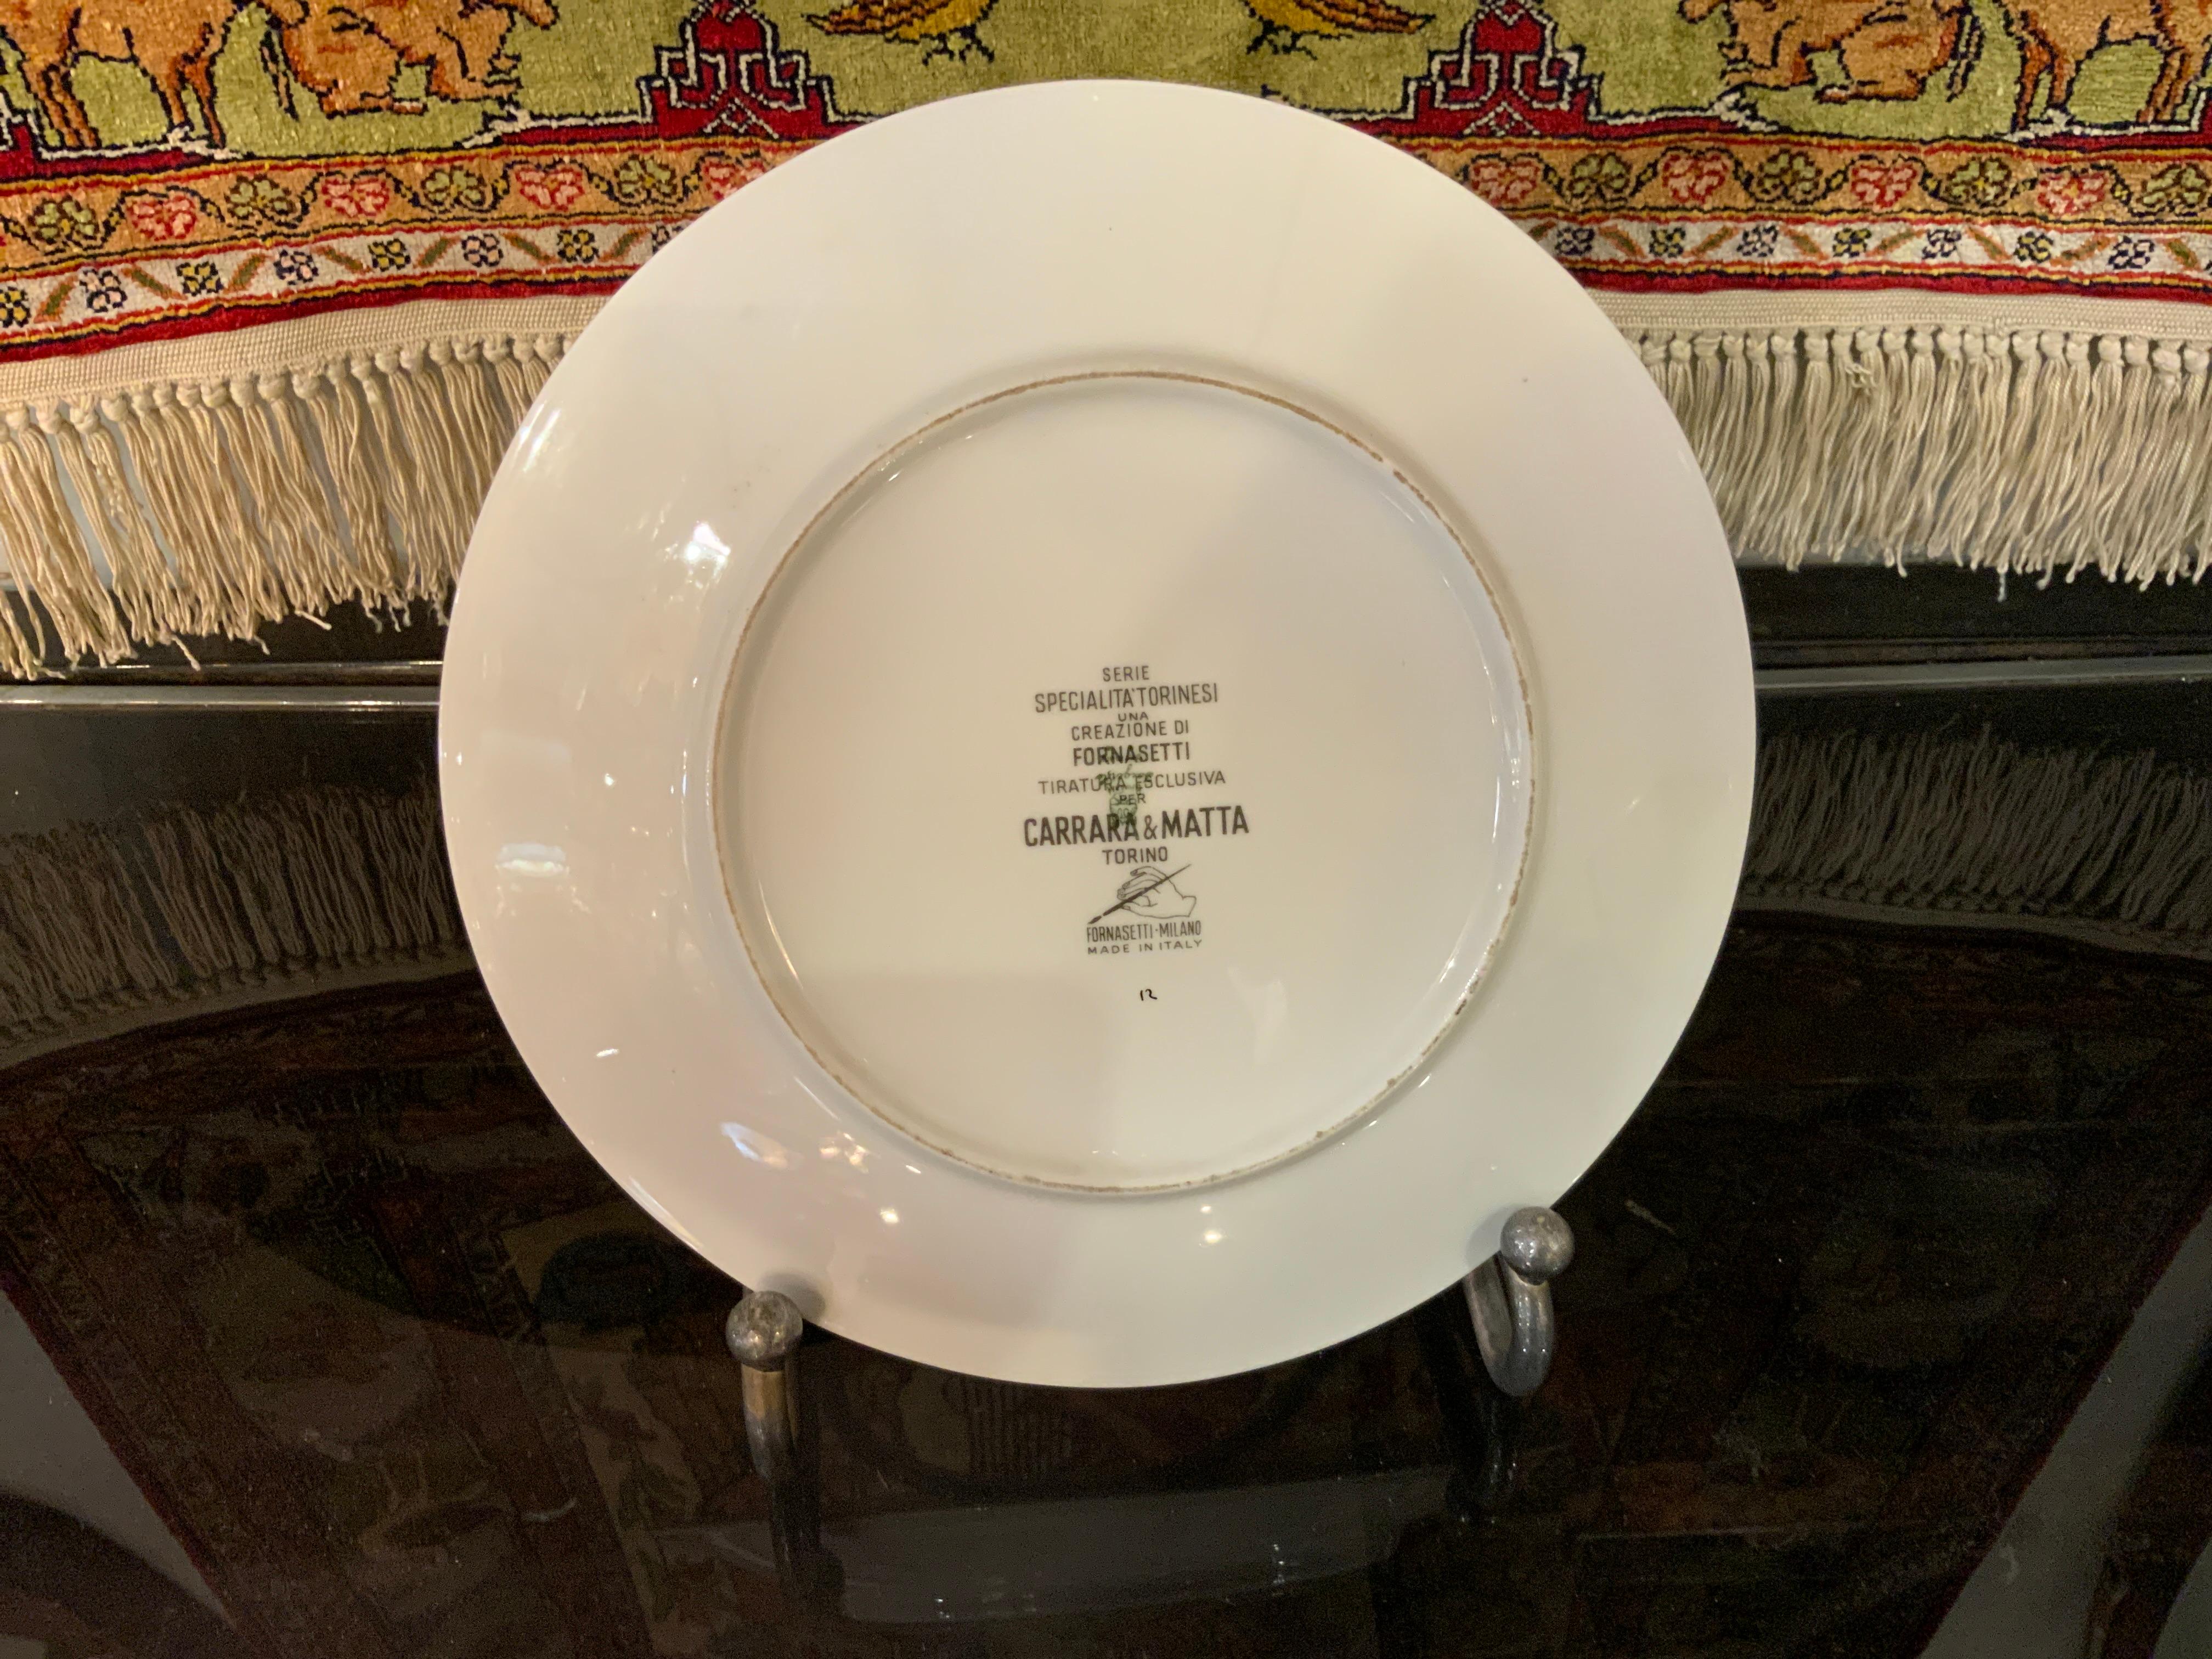 Decorative plate created by the Italian artist Piero Fornasetti, part of a series of recipes created specifically for the Carrara e Matta company, the dish is particularly rare and is in perfect condition in its small size is another work of art by